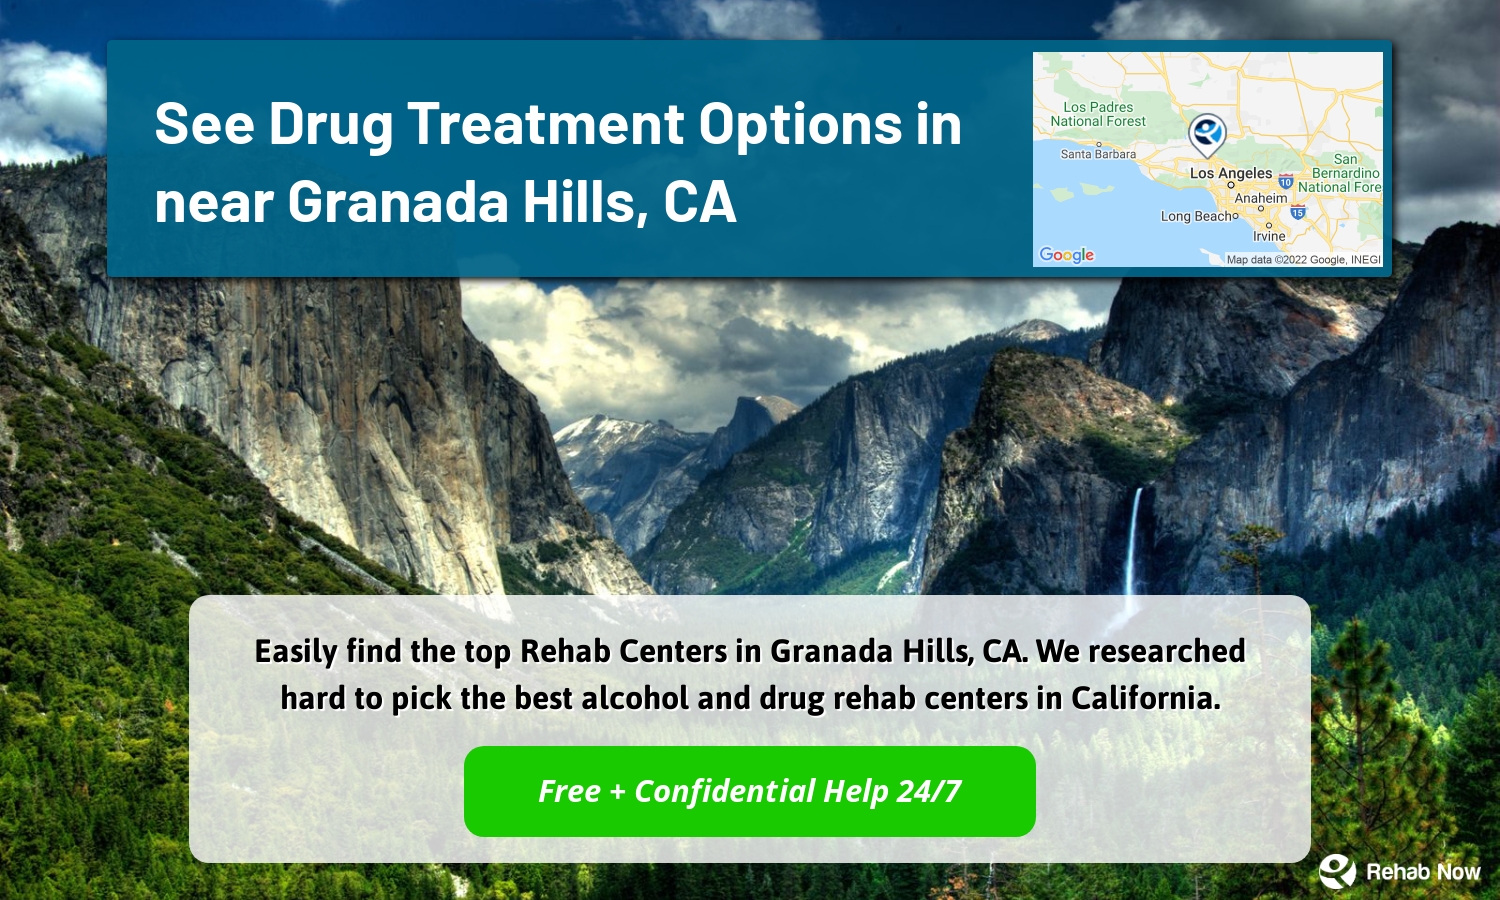 Easily find the top Rehab Centers in Granada Hills, CA. We researched hard to pick the best alcohol and drug rehab centers in California.